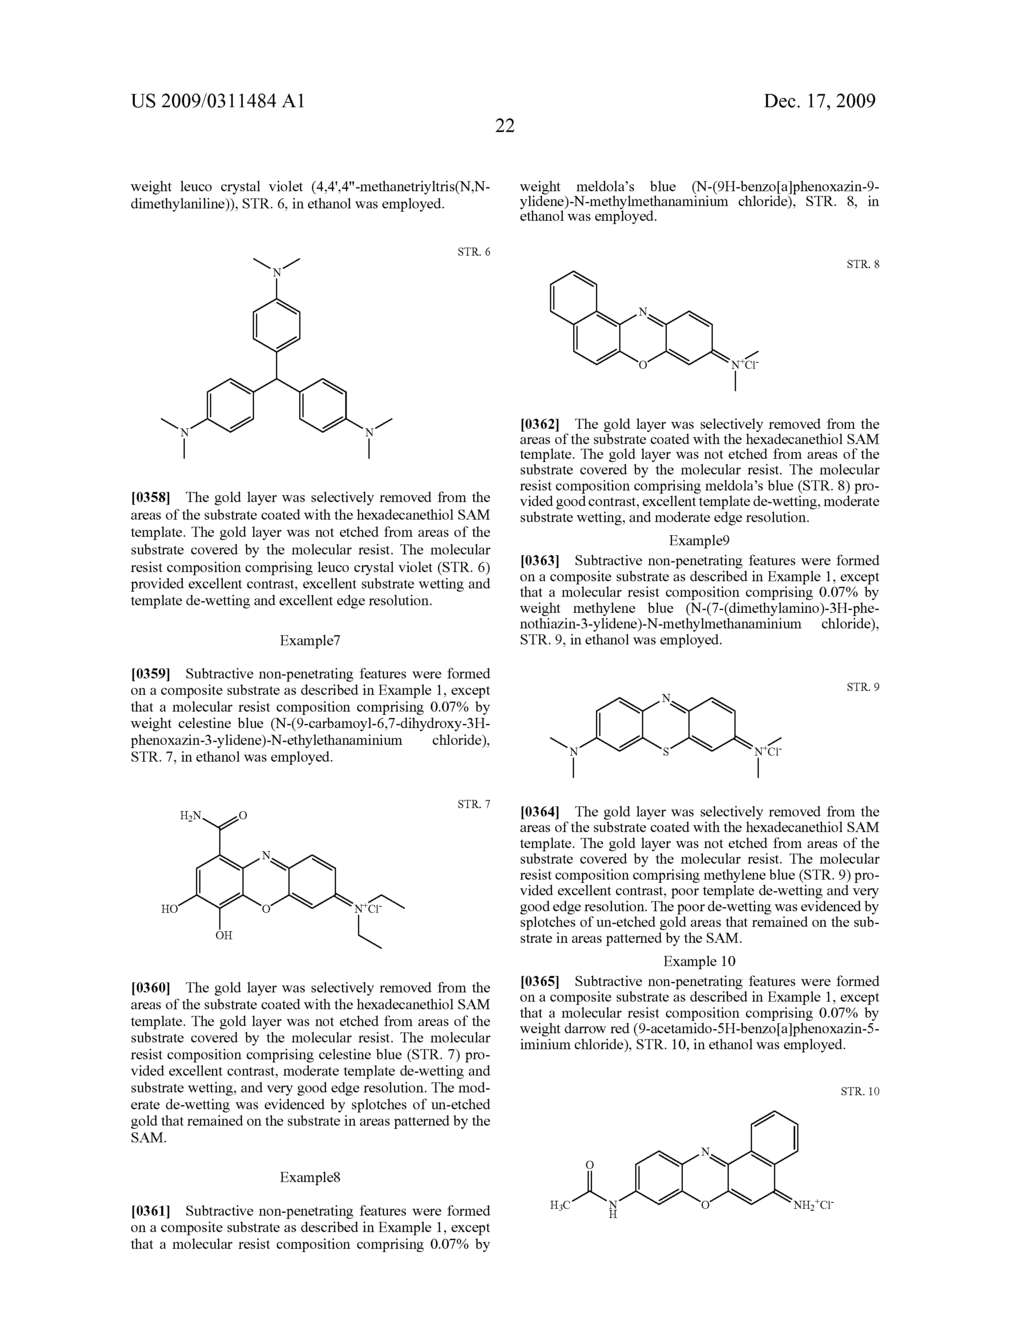 Molecular Resist Compositions, Methods of Patterning Substrates Using the Compositions and Process Products Prepared Therefrom - diagram, schematic, and image 32